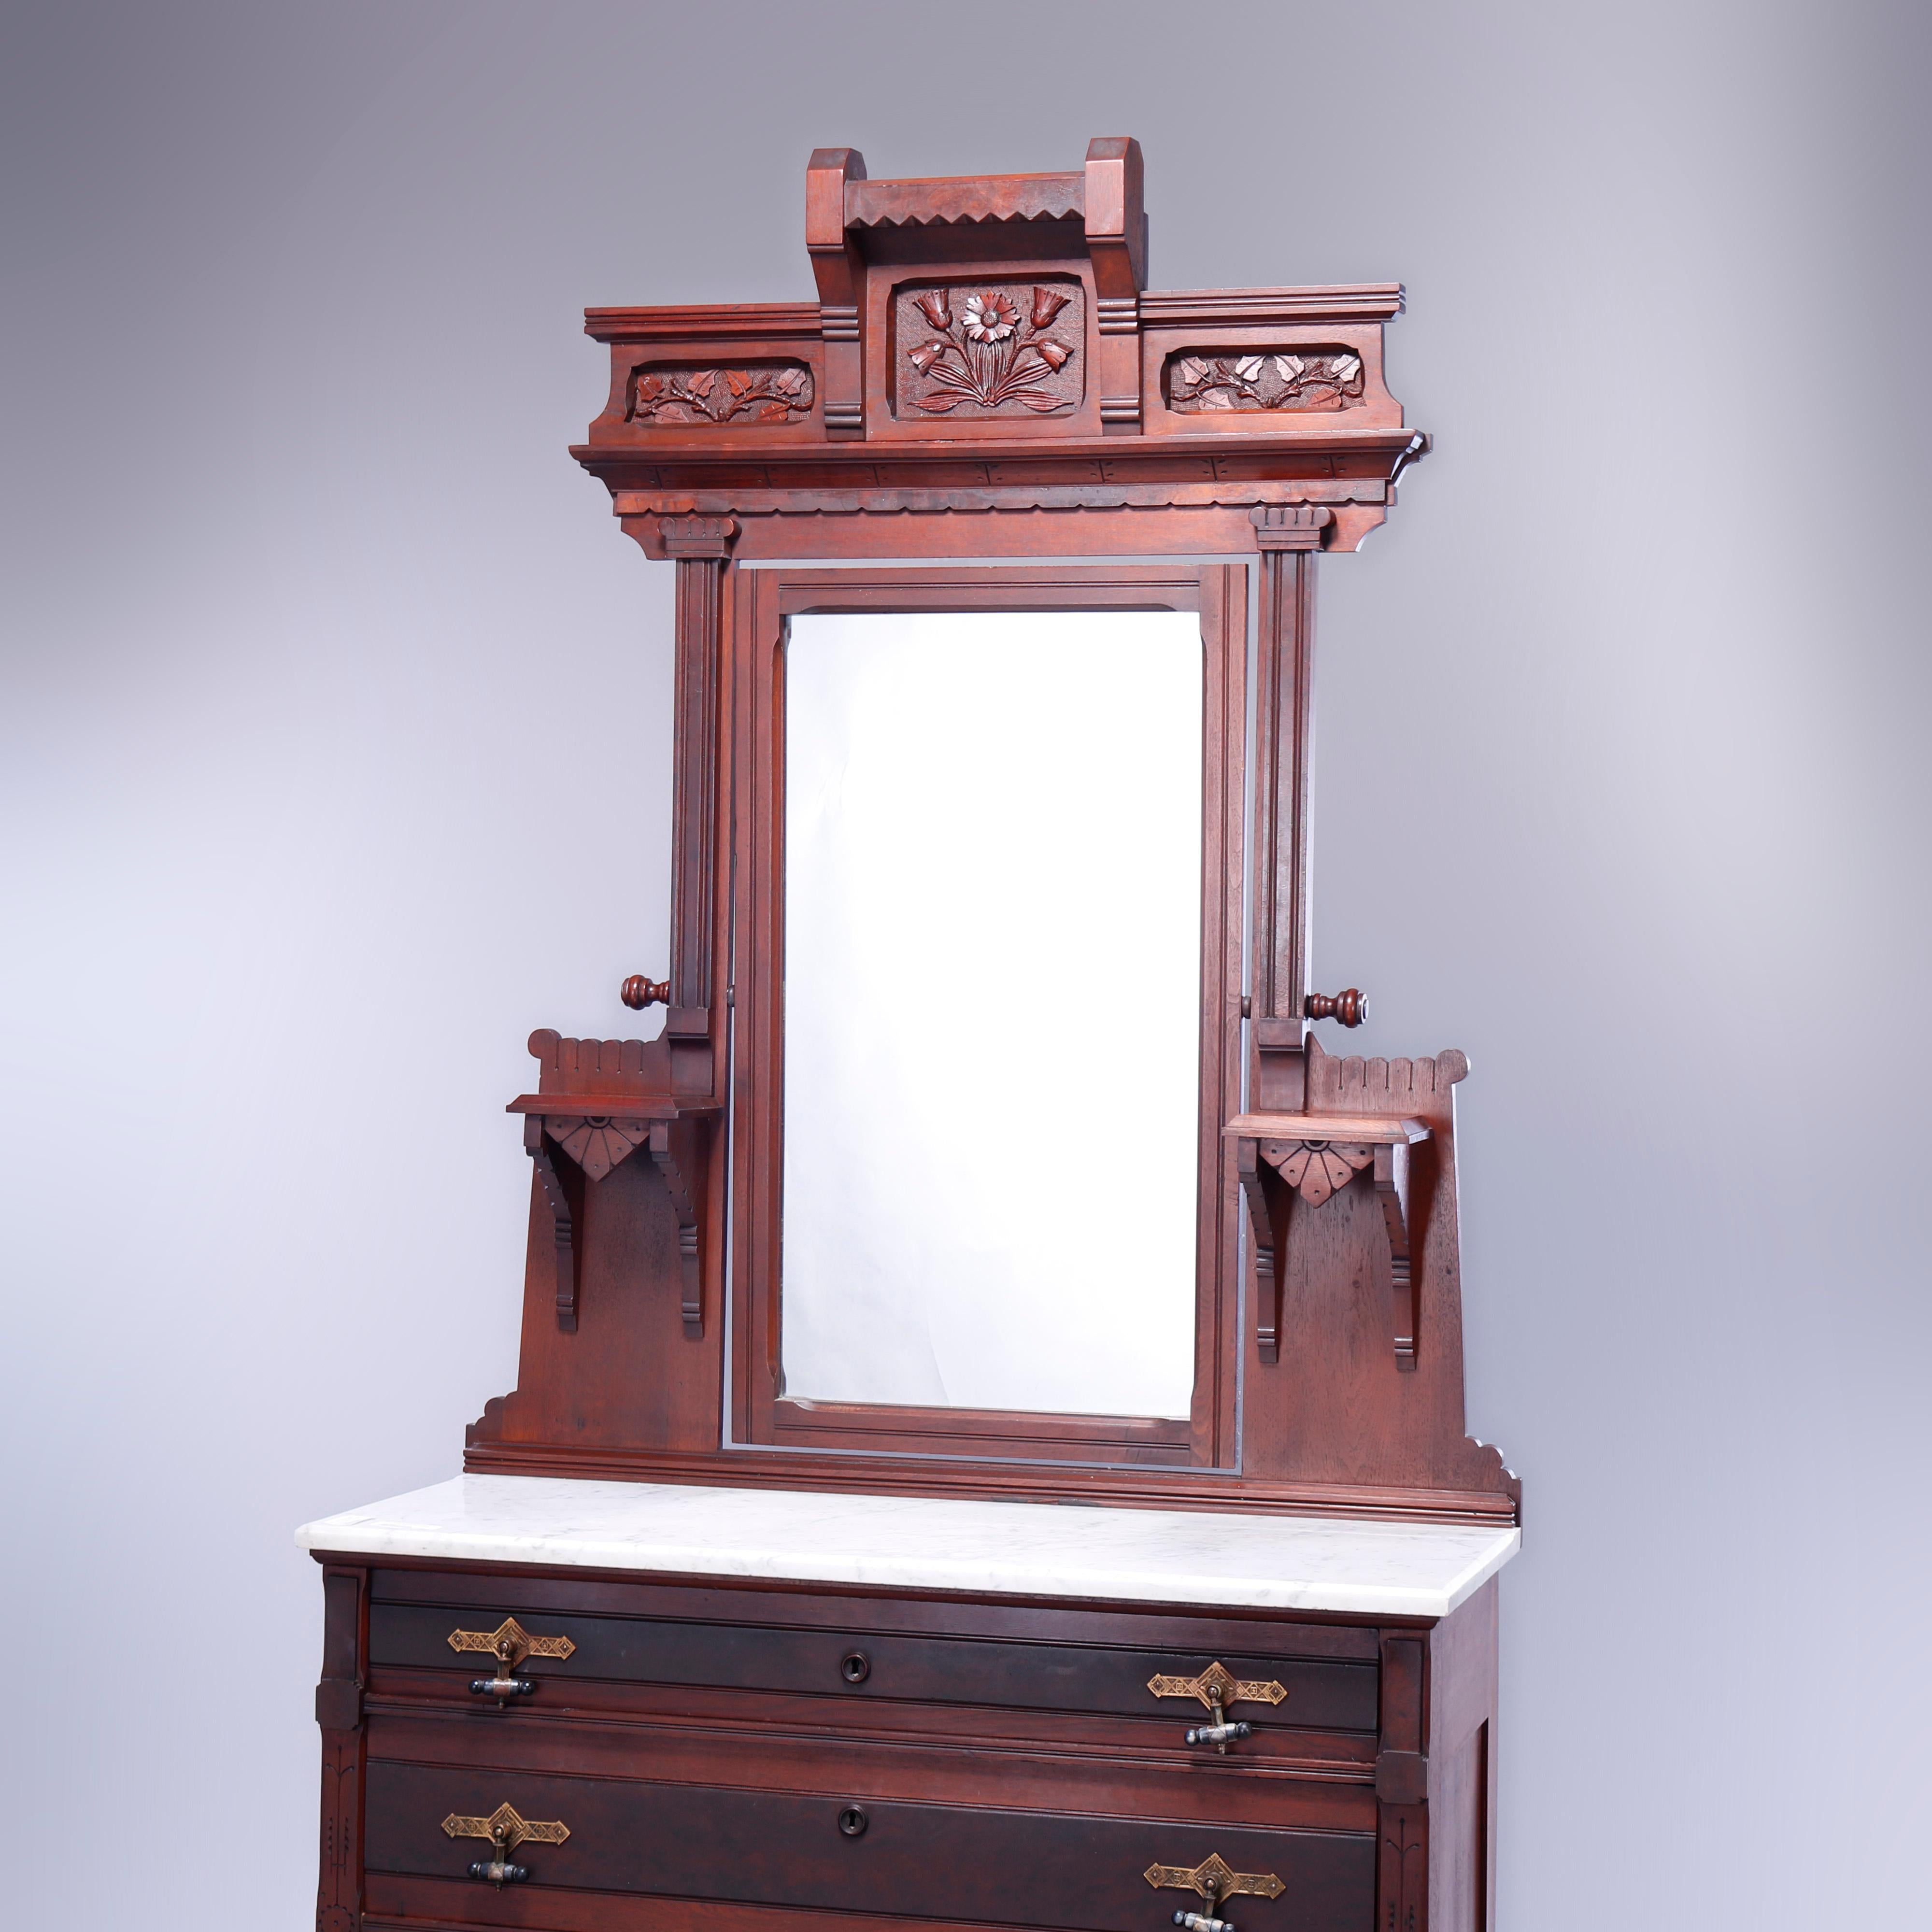 An antique Eastlake dresser offers walnut construction with floral and foliate carved crest over mirror with flanking candle stands surmounting marble top case having three paneled long drawers, incised decoration throughout, c1890

Measures -